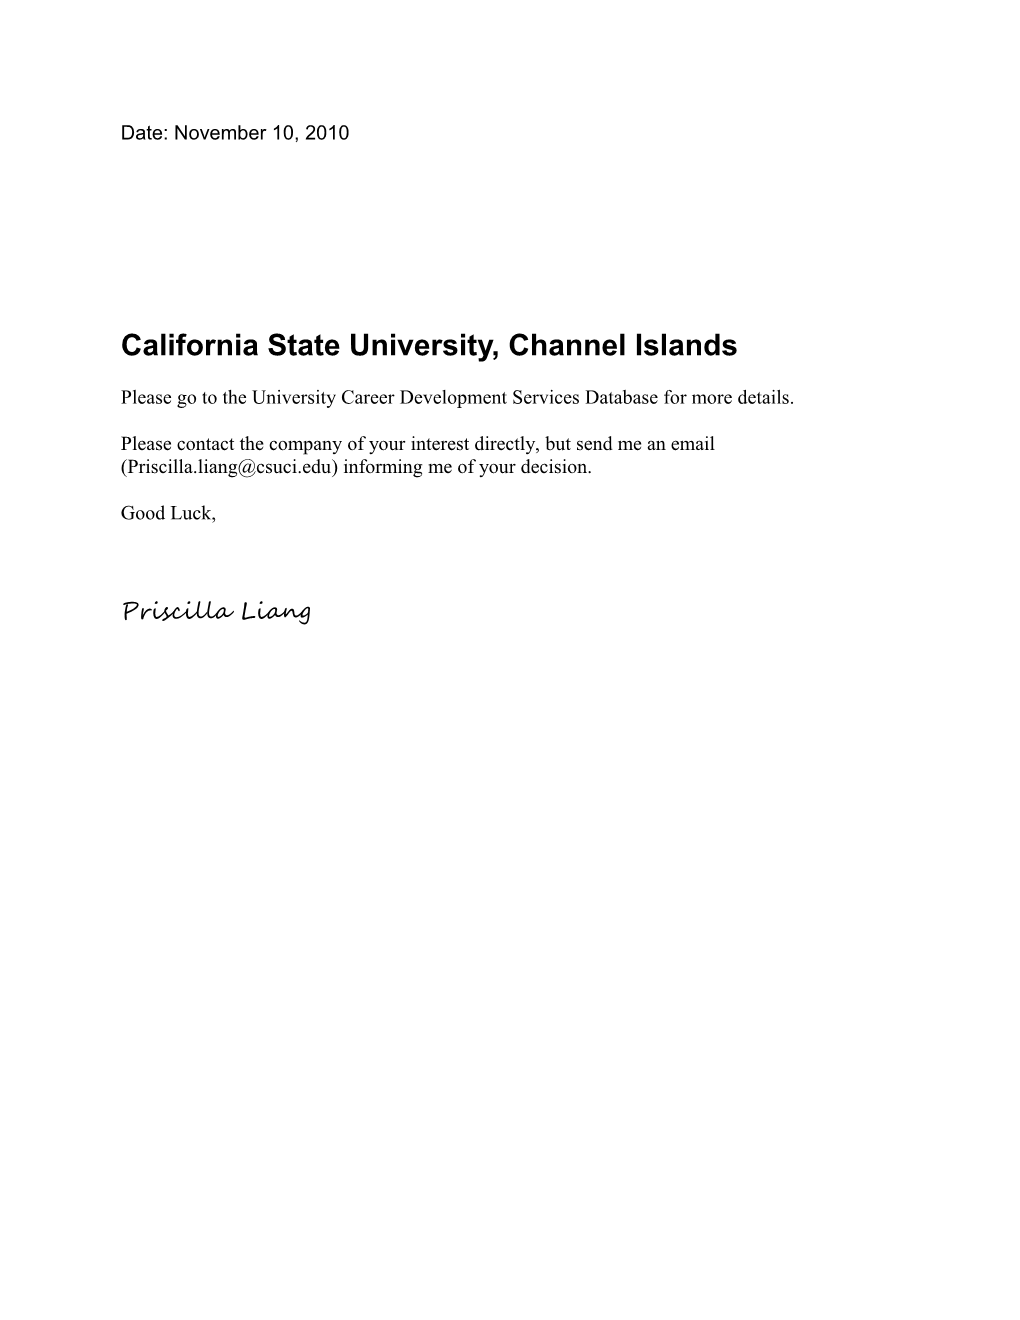 California State University, Channel Islands s1